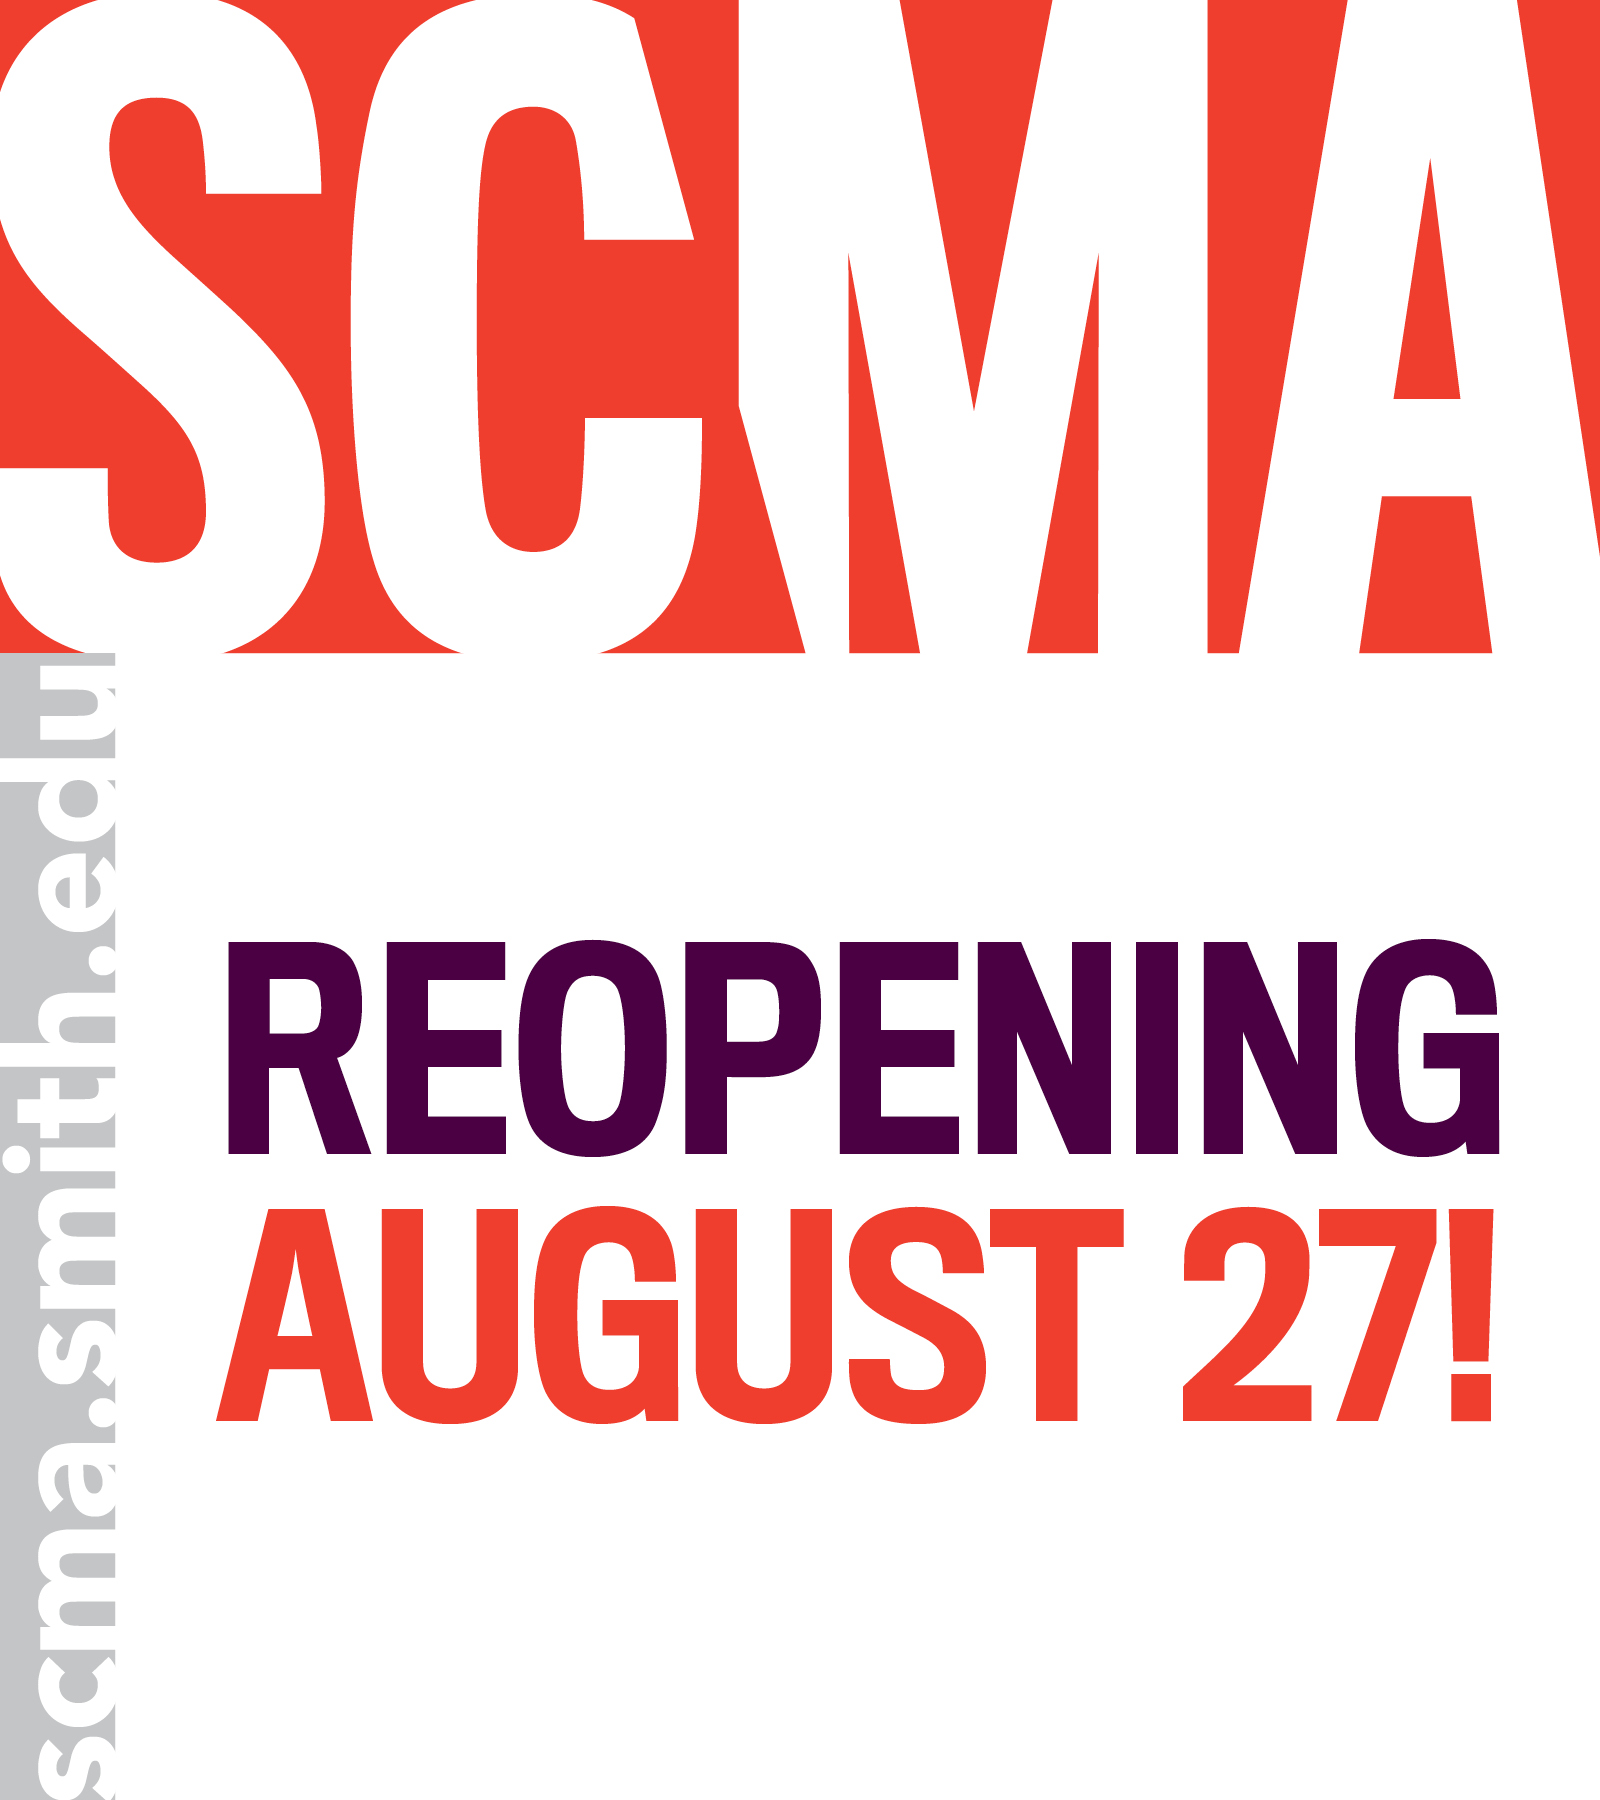 Smith College Museum of Art (SCMA) in Northampton, MA, announces its Reopening Weekend, Friday, August 27 through Sunday, August 29, 2021. Admission will be FREE all weekend. SCMA staff are delighted to welcome visitors back to the museum after being closed since March of 2020. Before your arrival, please take a moment to visit scma.smith.edu for health and safety information and further details that will help make your visit as safe, easy, and enjoyable as possible. 